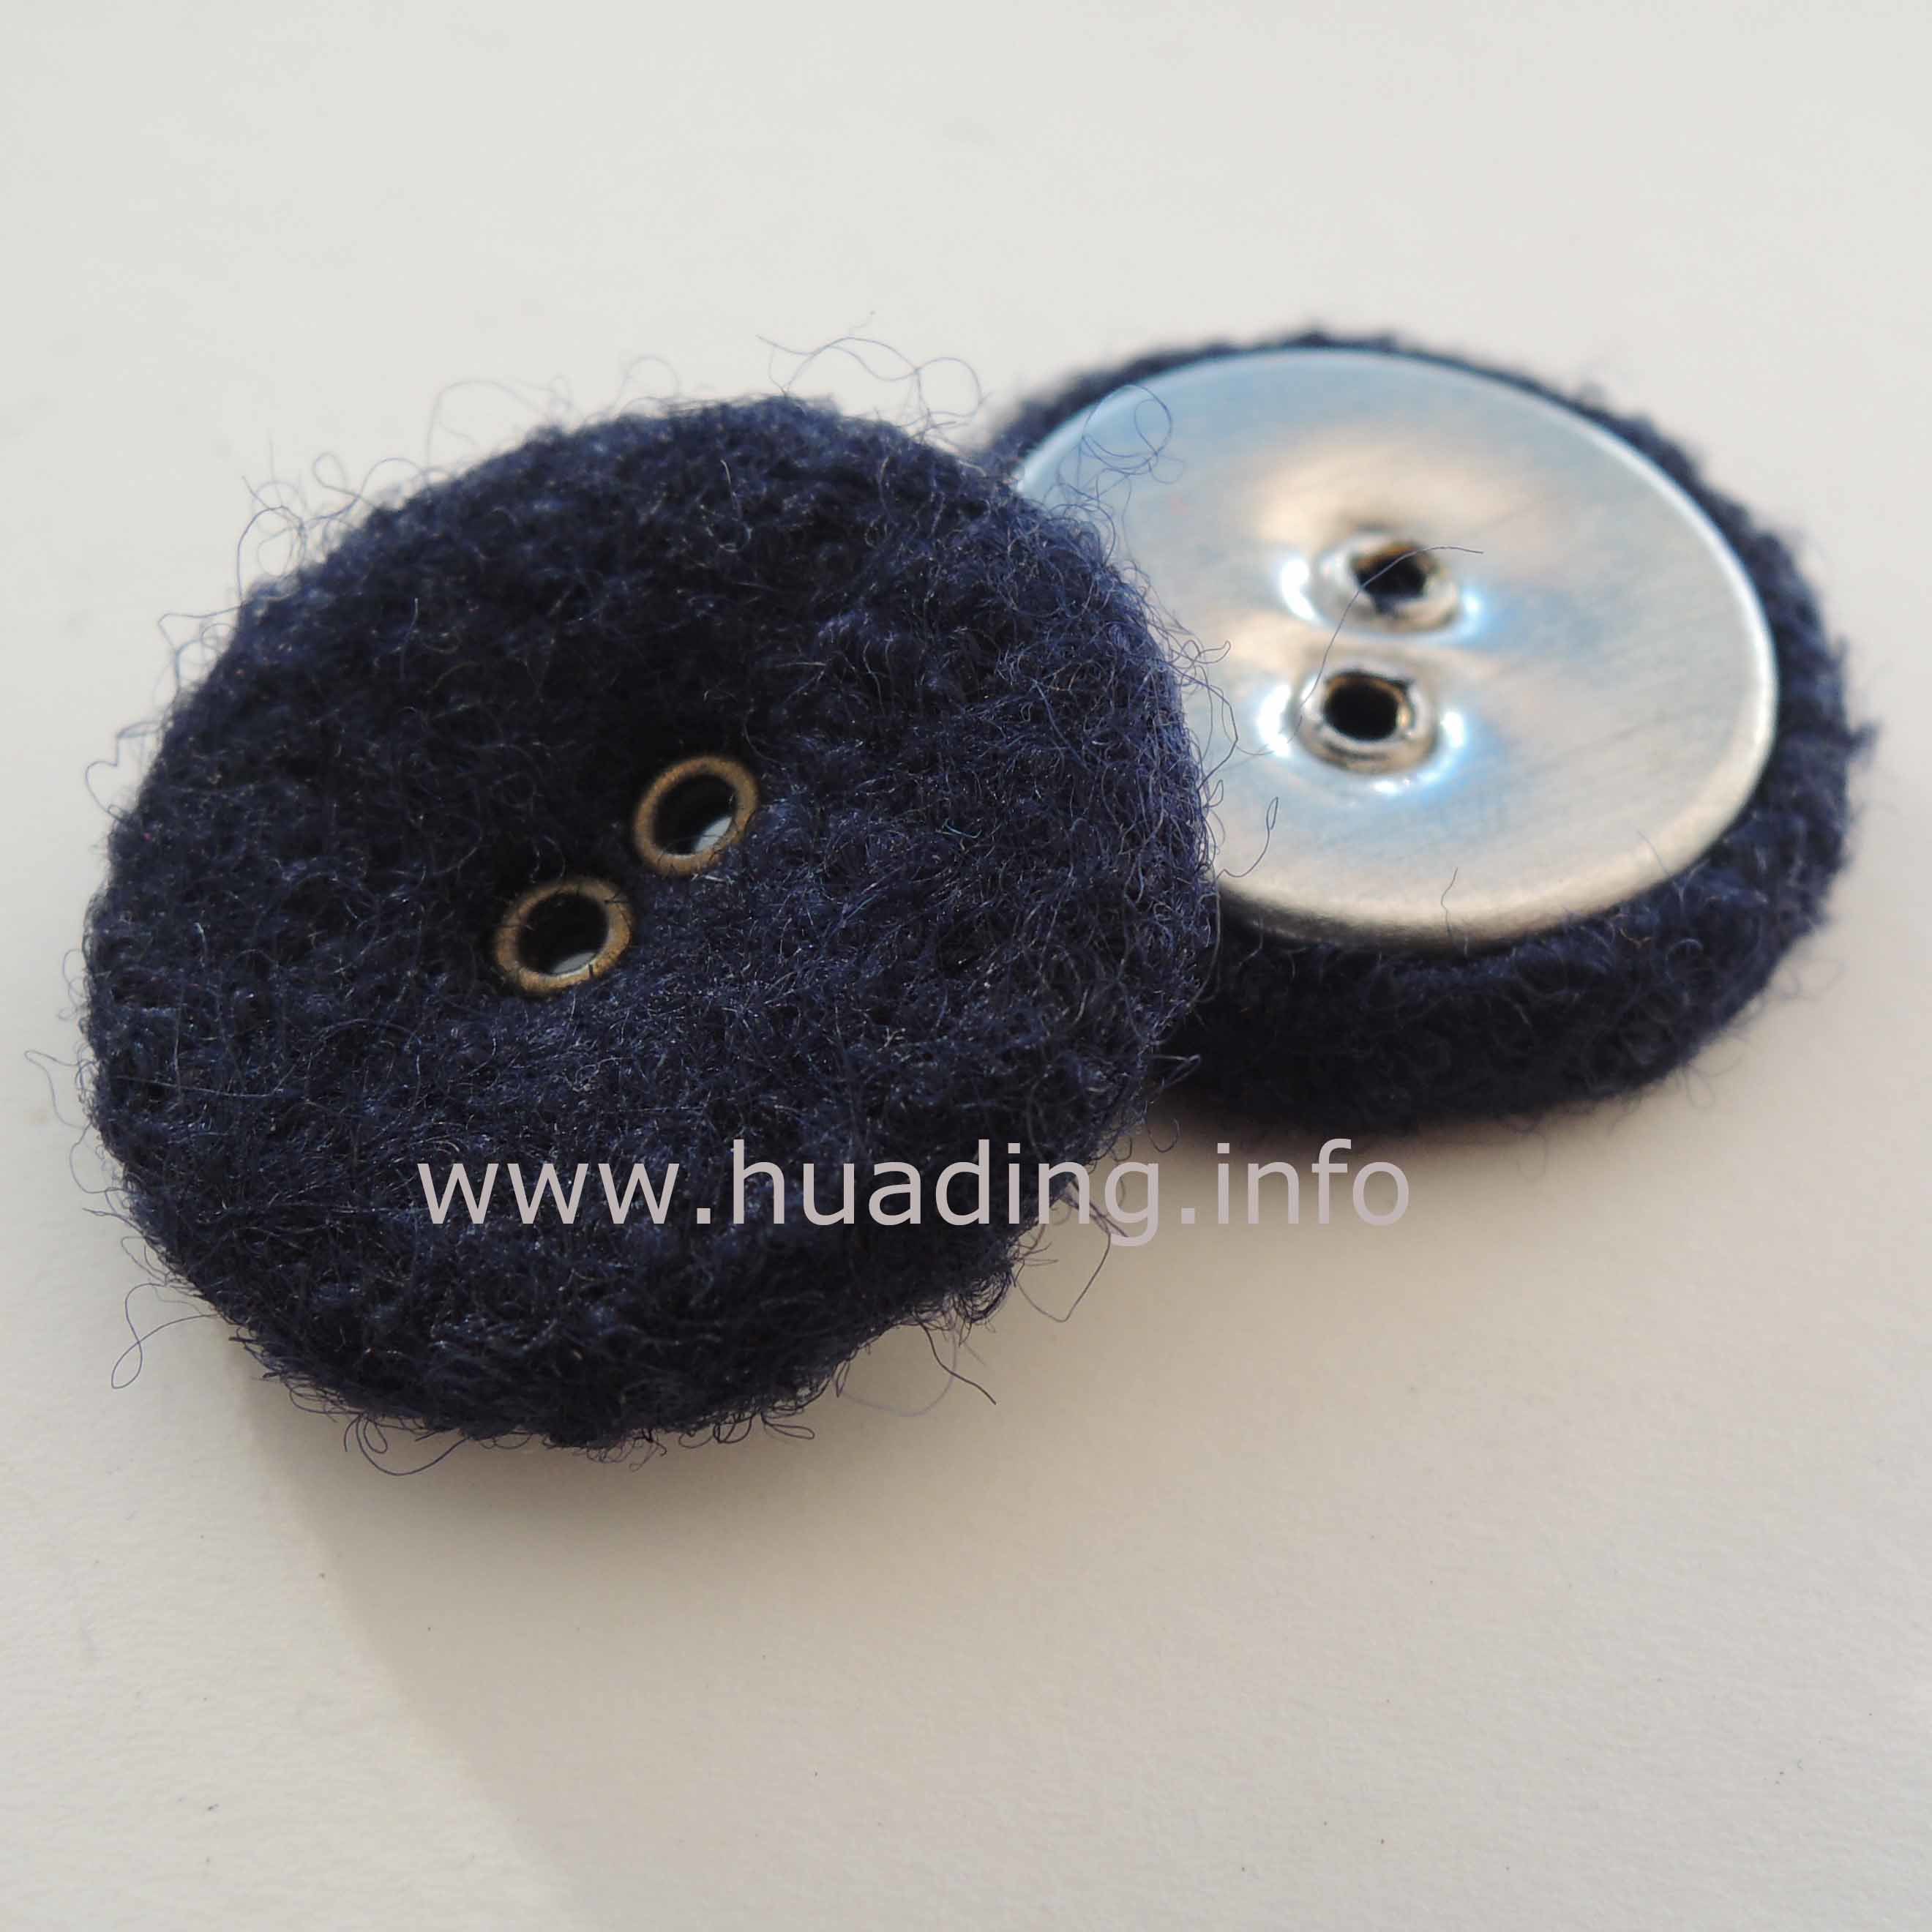 Fabric Covered Two-Hole Plastic Sewing Button for Accessories (Ts-03)